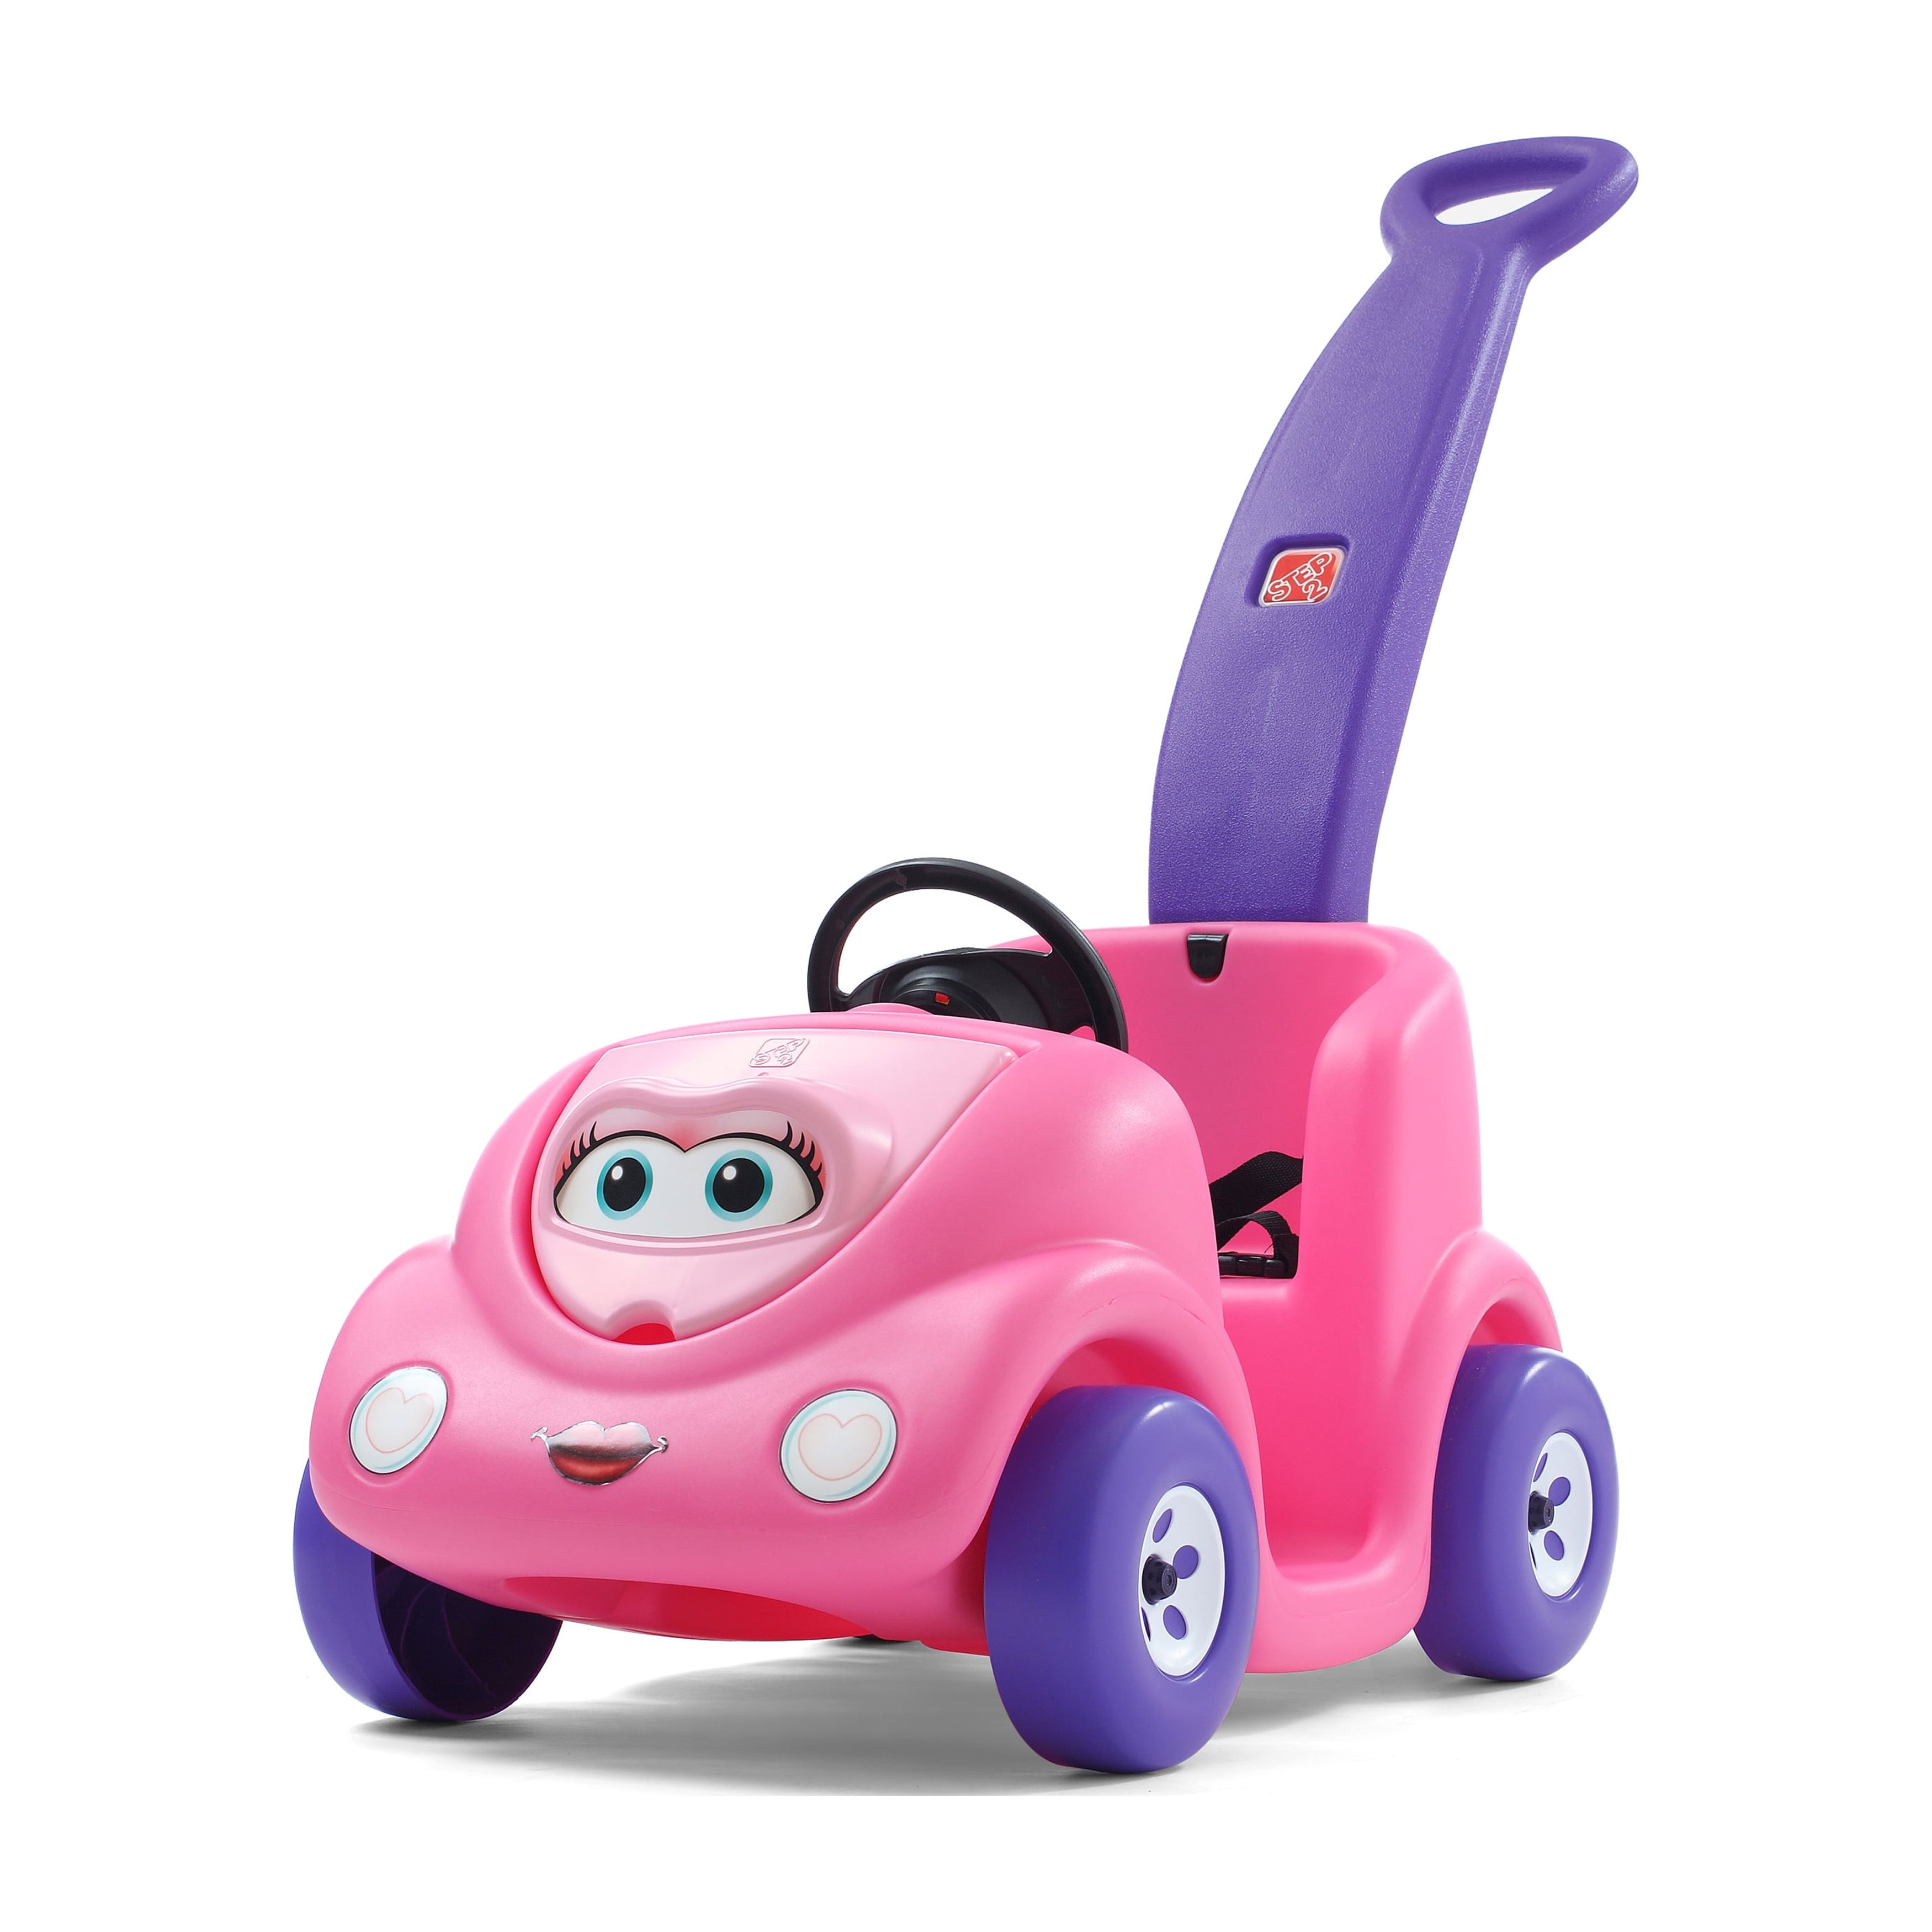 Step2 Push Around Buggy Pink 10th Anniversary Edition Kids Push Car and Ride On Toy for Toddler - image 1 of 9